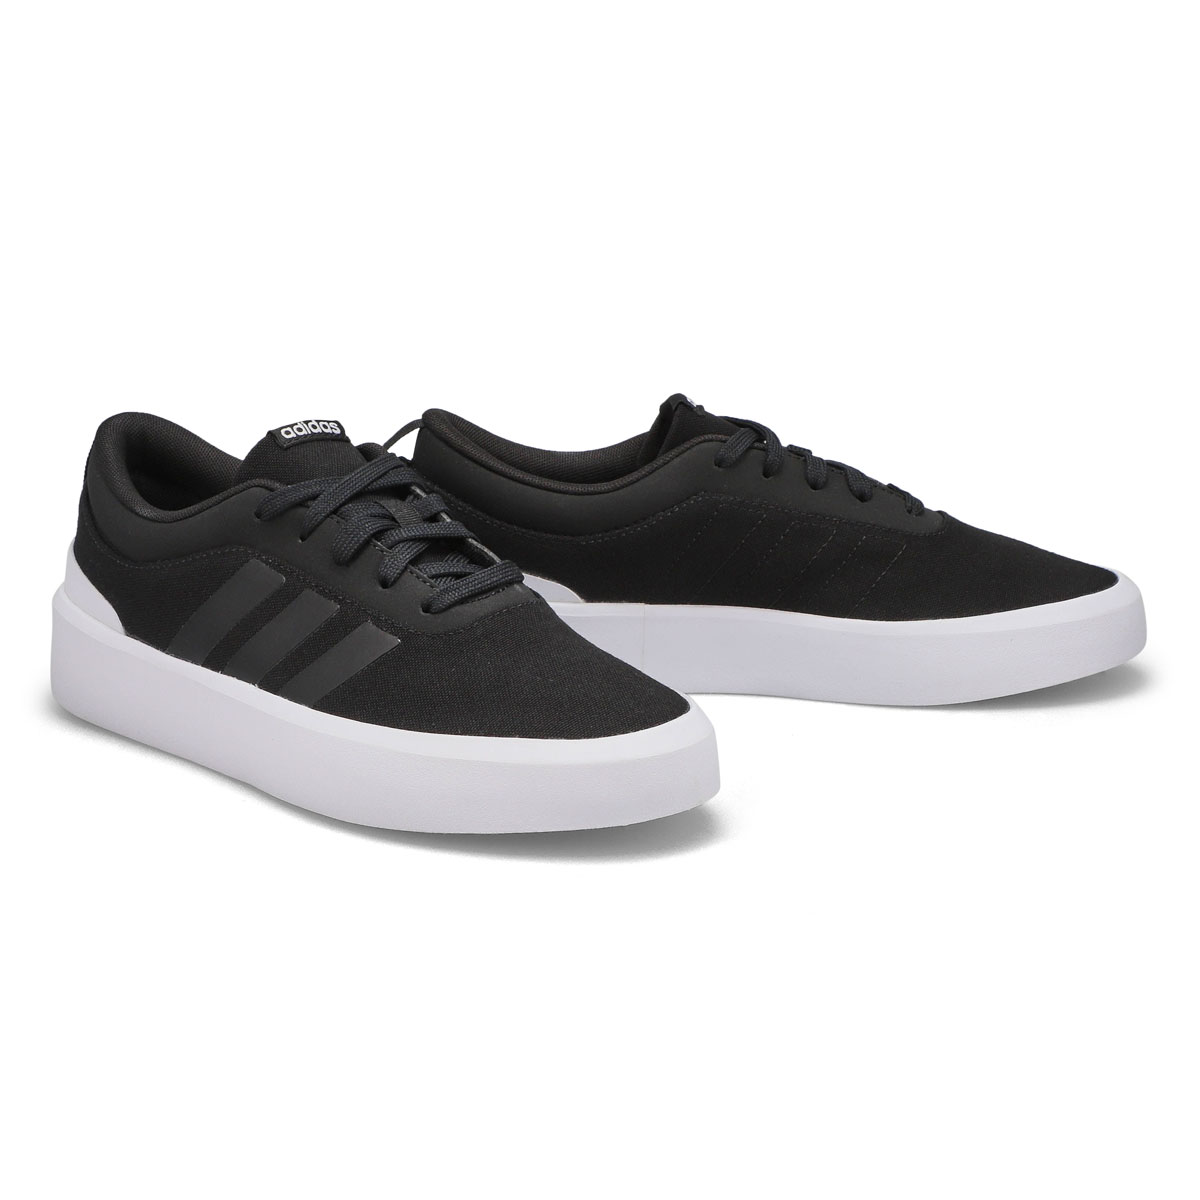 Adidas Sportswear Products, Up To 80% Off on Slip On, Lace Up Outdoor  Shoes & More